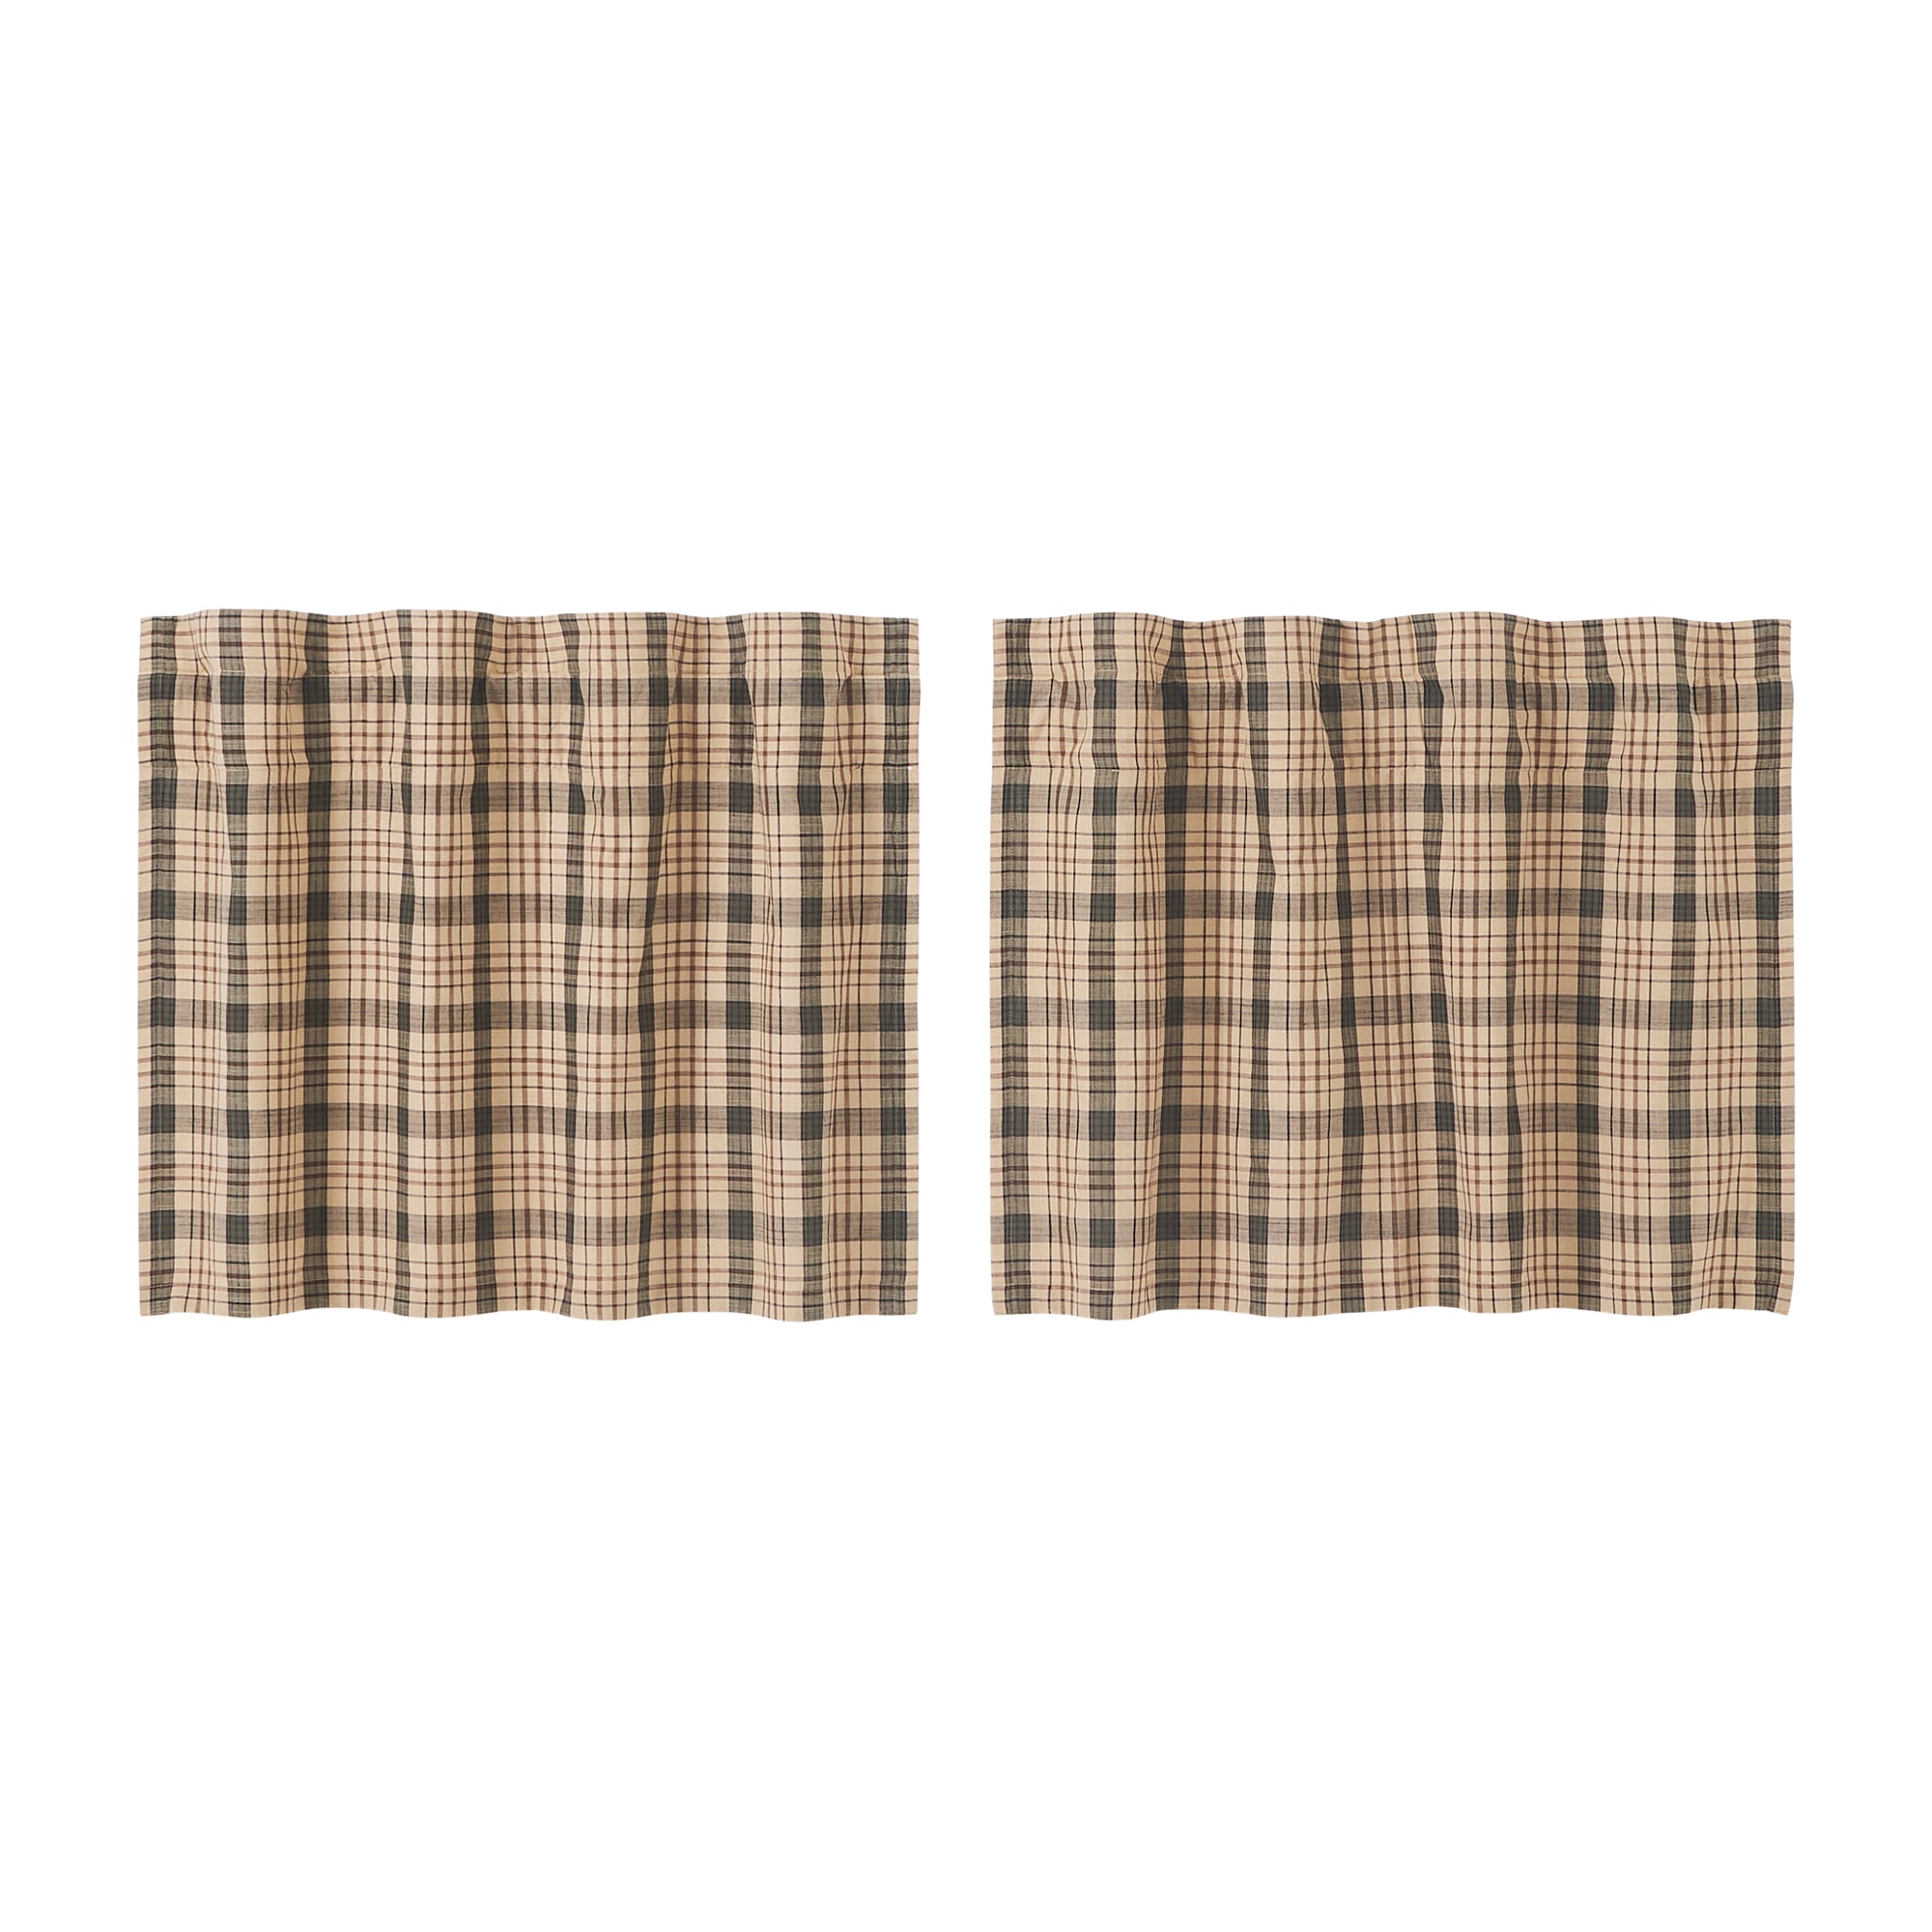 Mayflower Market Cider Mill Plaid Tier Set of 2 L24xW36 By VHC Brands